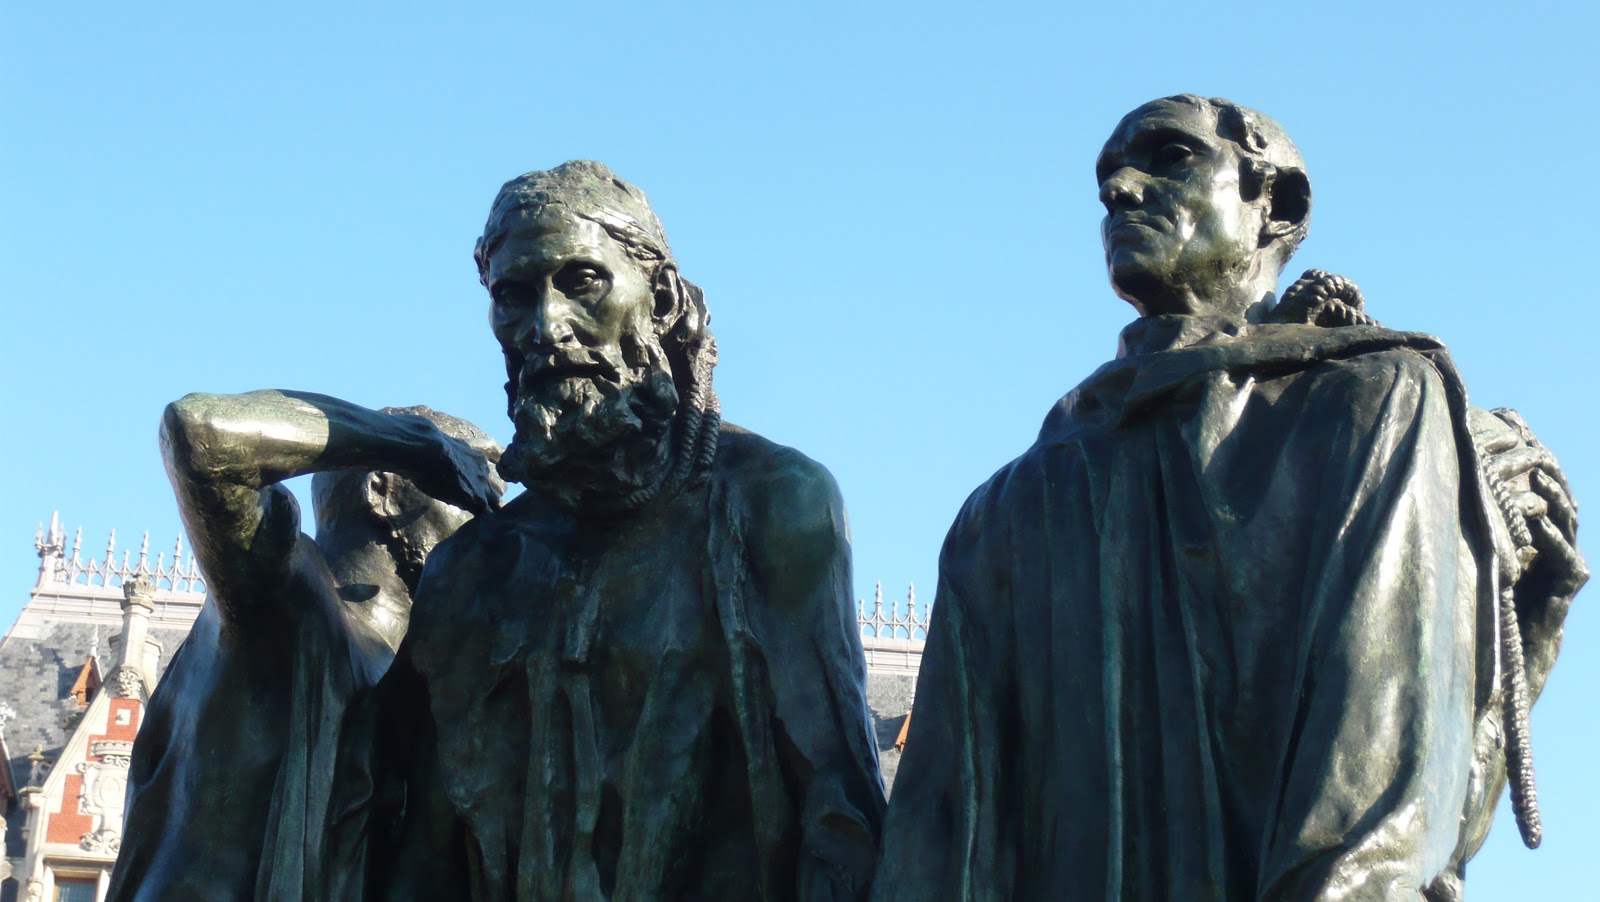 Between: The Burghers of Calais